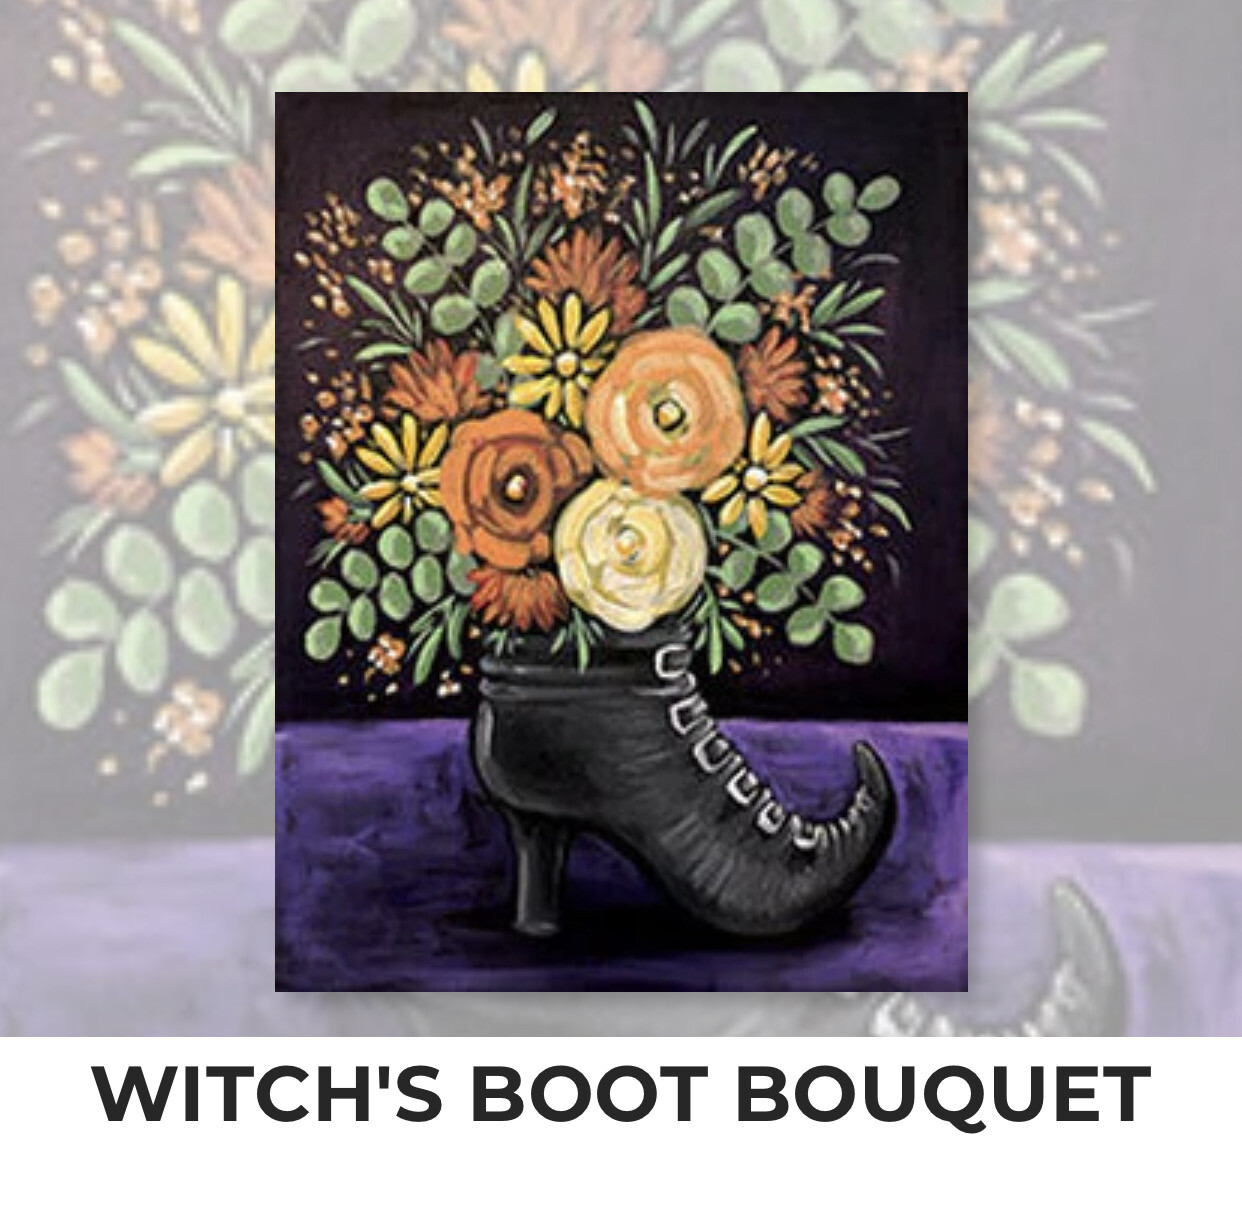 Witch’s Boot Bouquet ADULT Acrylic Paint On Canvas DIY Art Kit - 3 Week Special Order